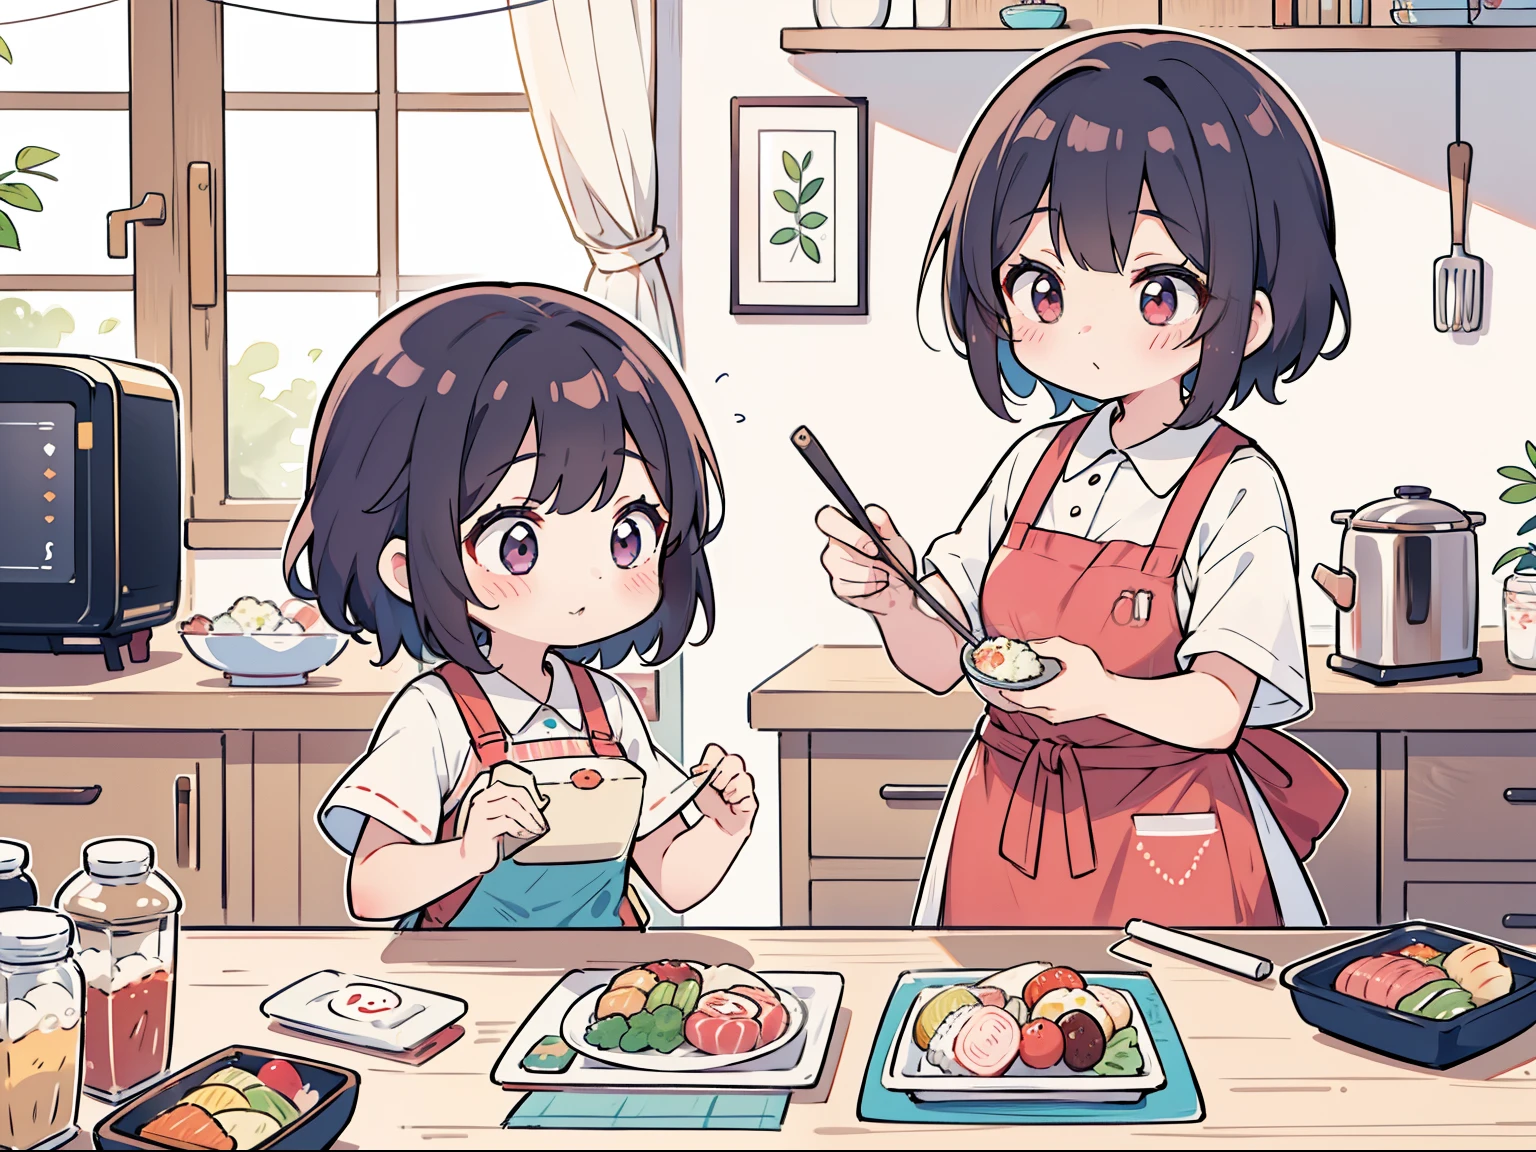 Daughter approaching mother getting ready for morning. Mother cooking is very beautiful. Make a bento. Daughter looking at it deliciously. There was one woman and one girl in the kitchen. Colorful. ultra-detailliert. Delicious-looking bento. high-level image quality.